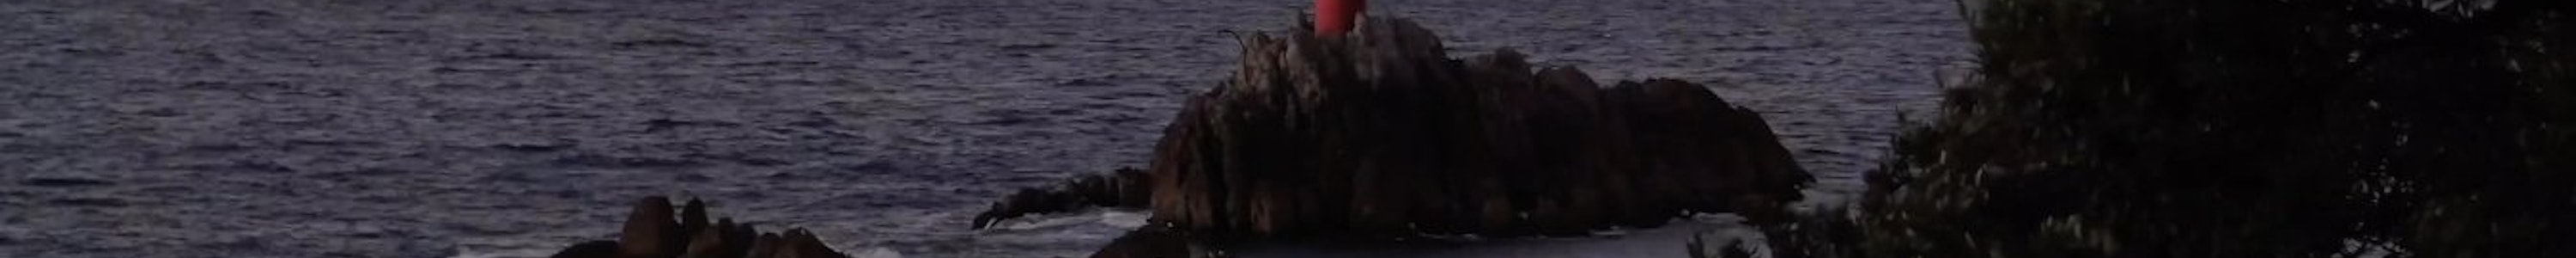 Jagged rocks stick out of the ocean underneath a pinky blue sunset or sunrise. On the rocks is a bright red cylinder object.